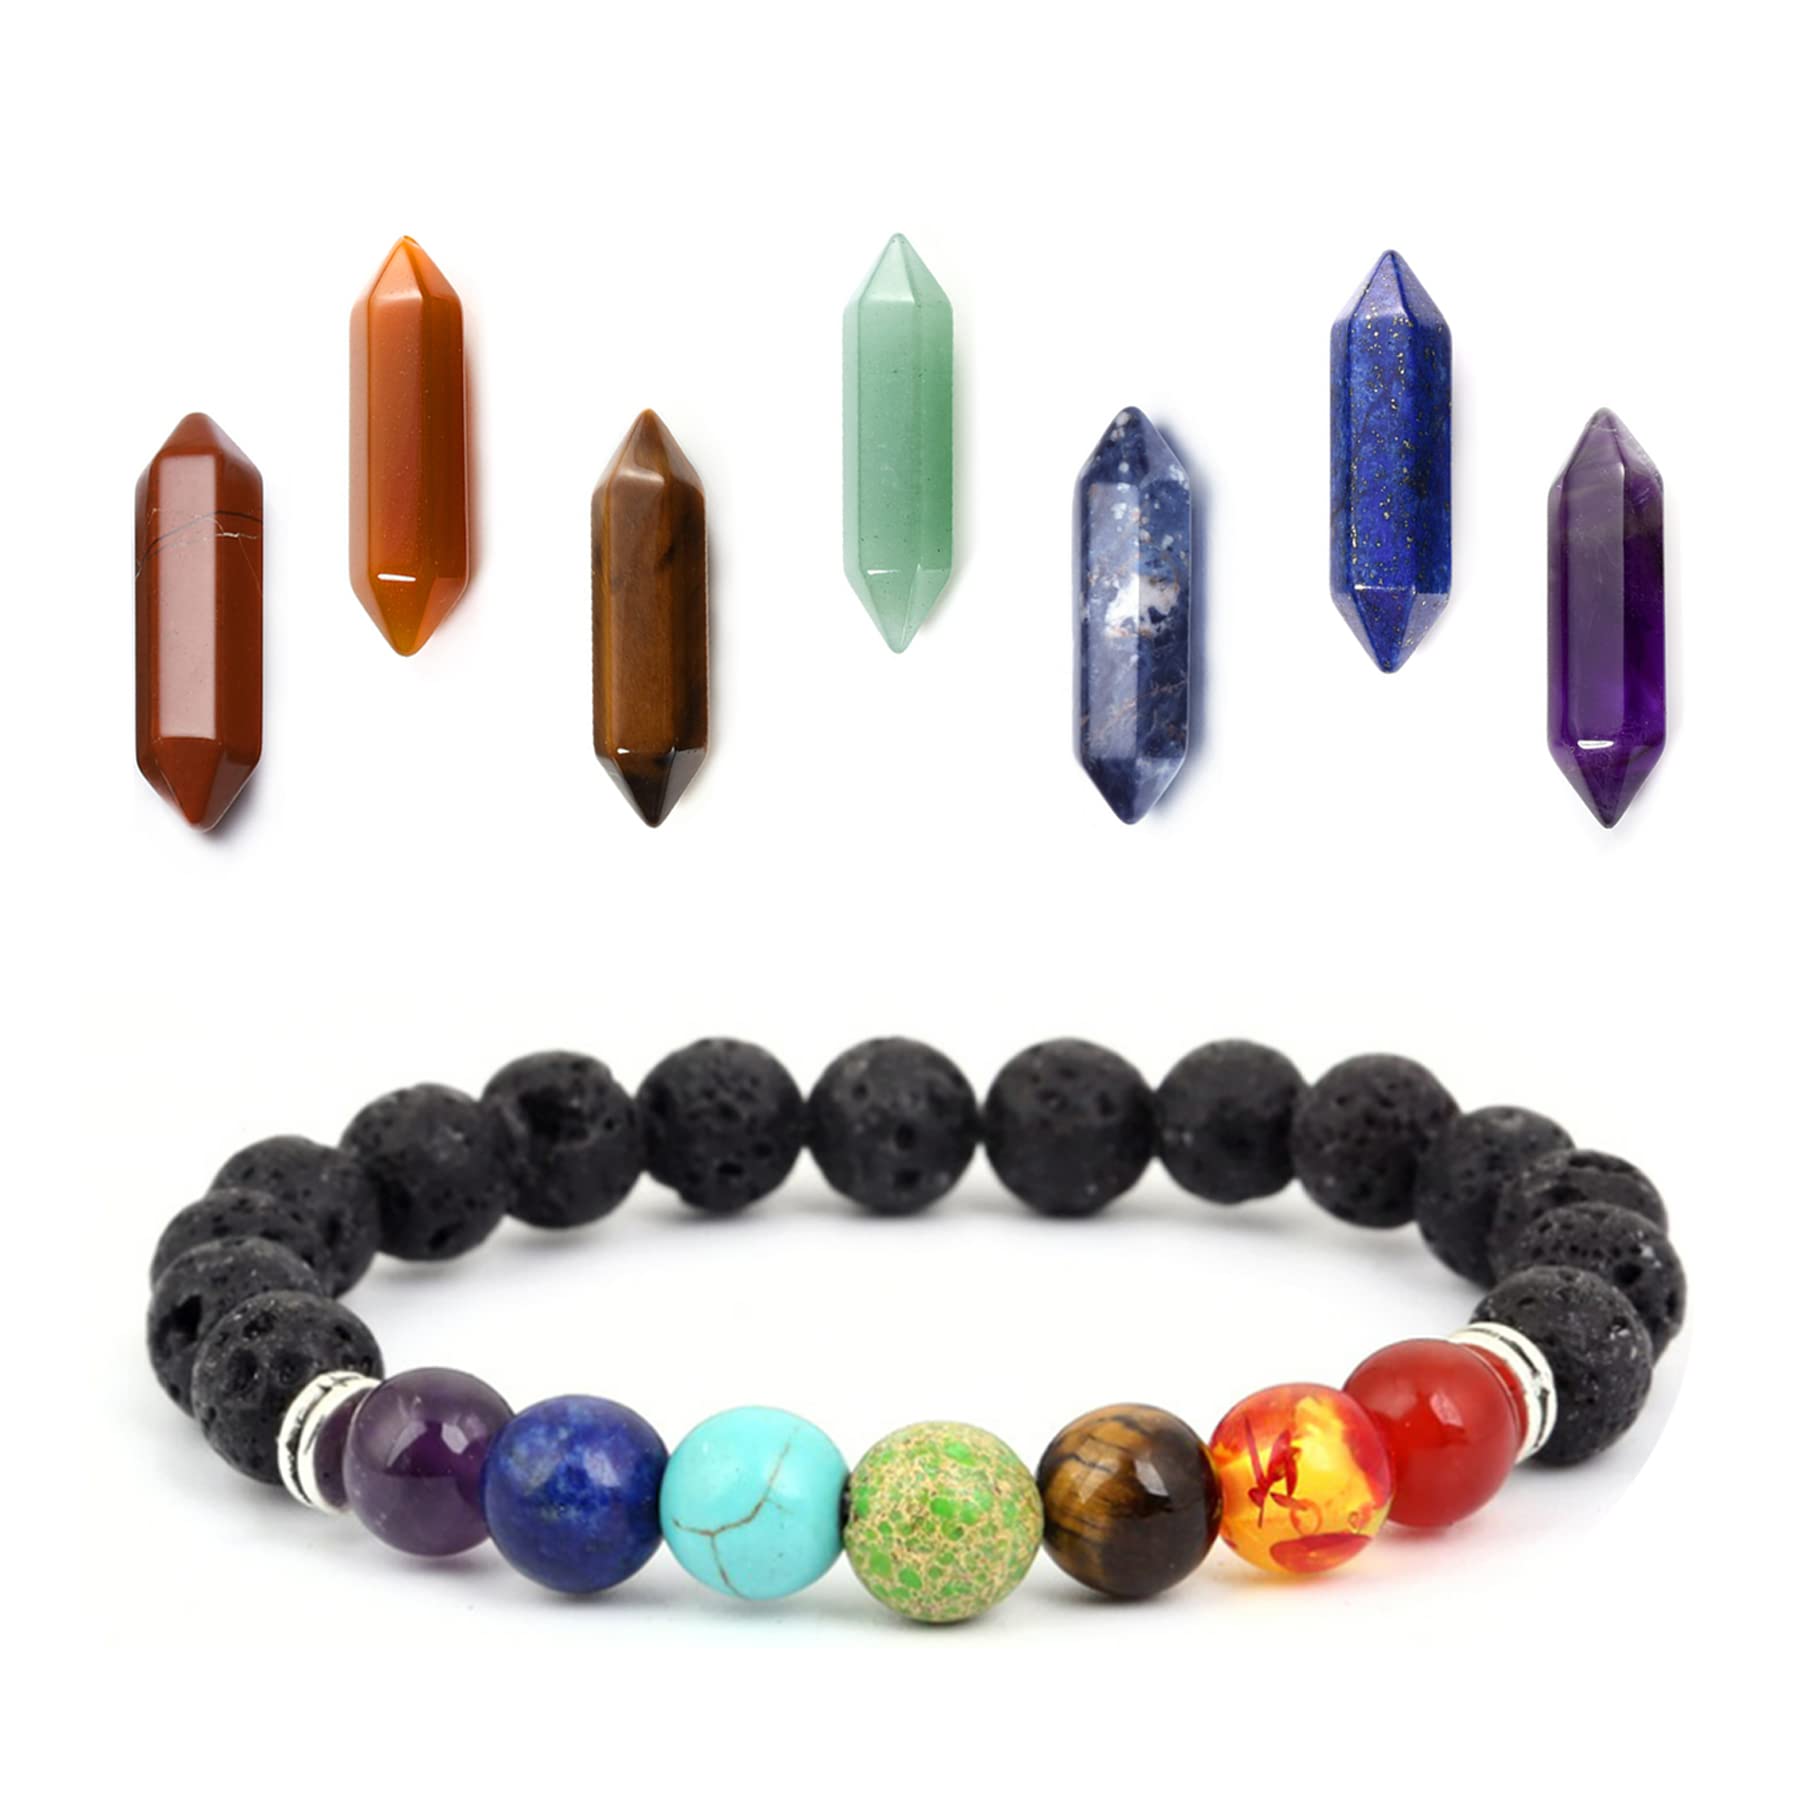 Here's How to wear an Obsidian Crystal Bracelet for Wealth and Protection